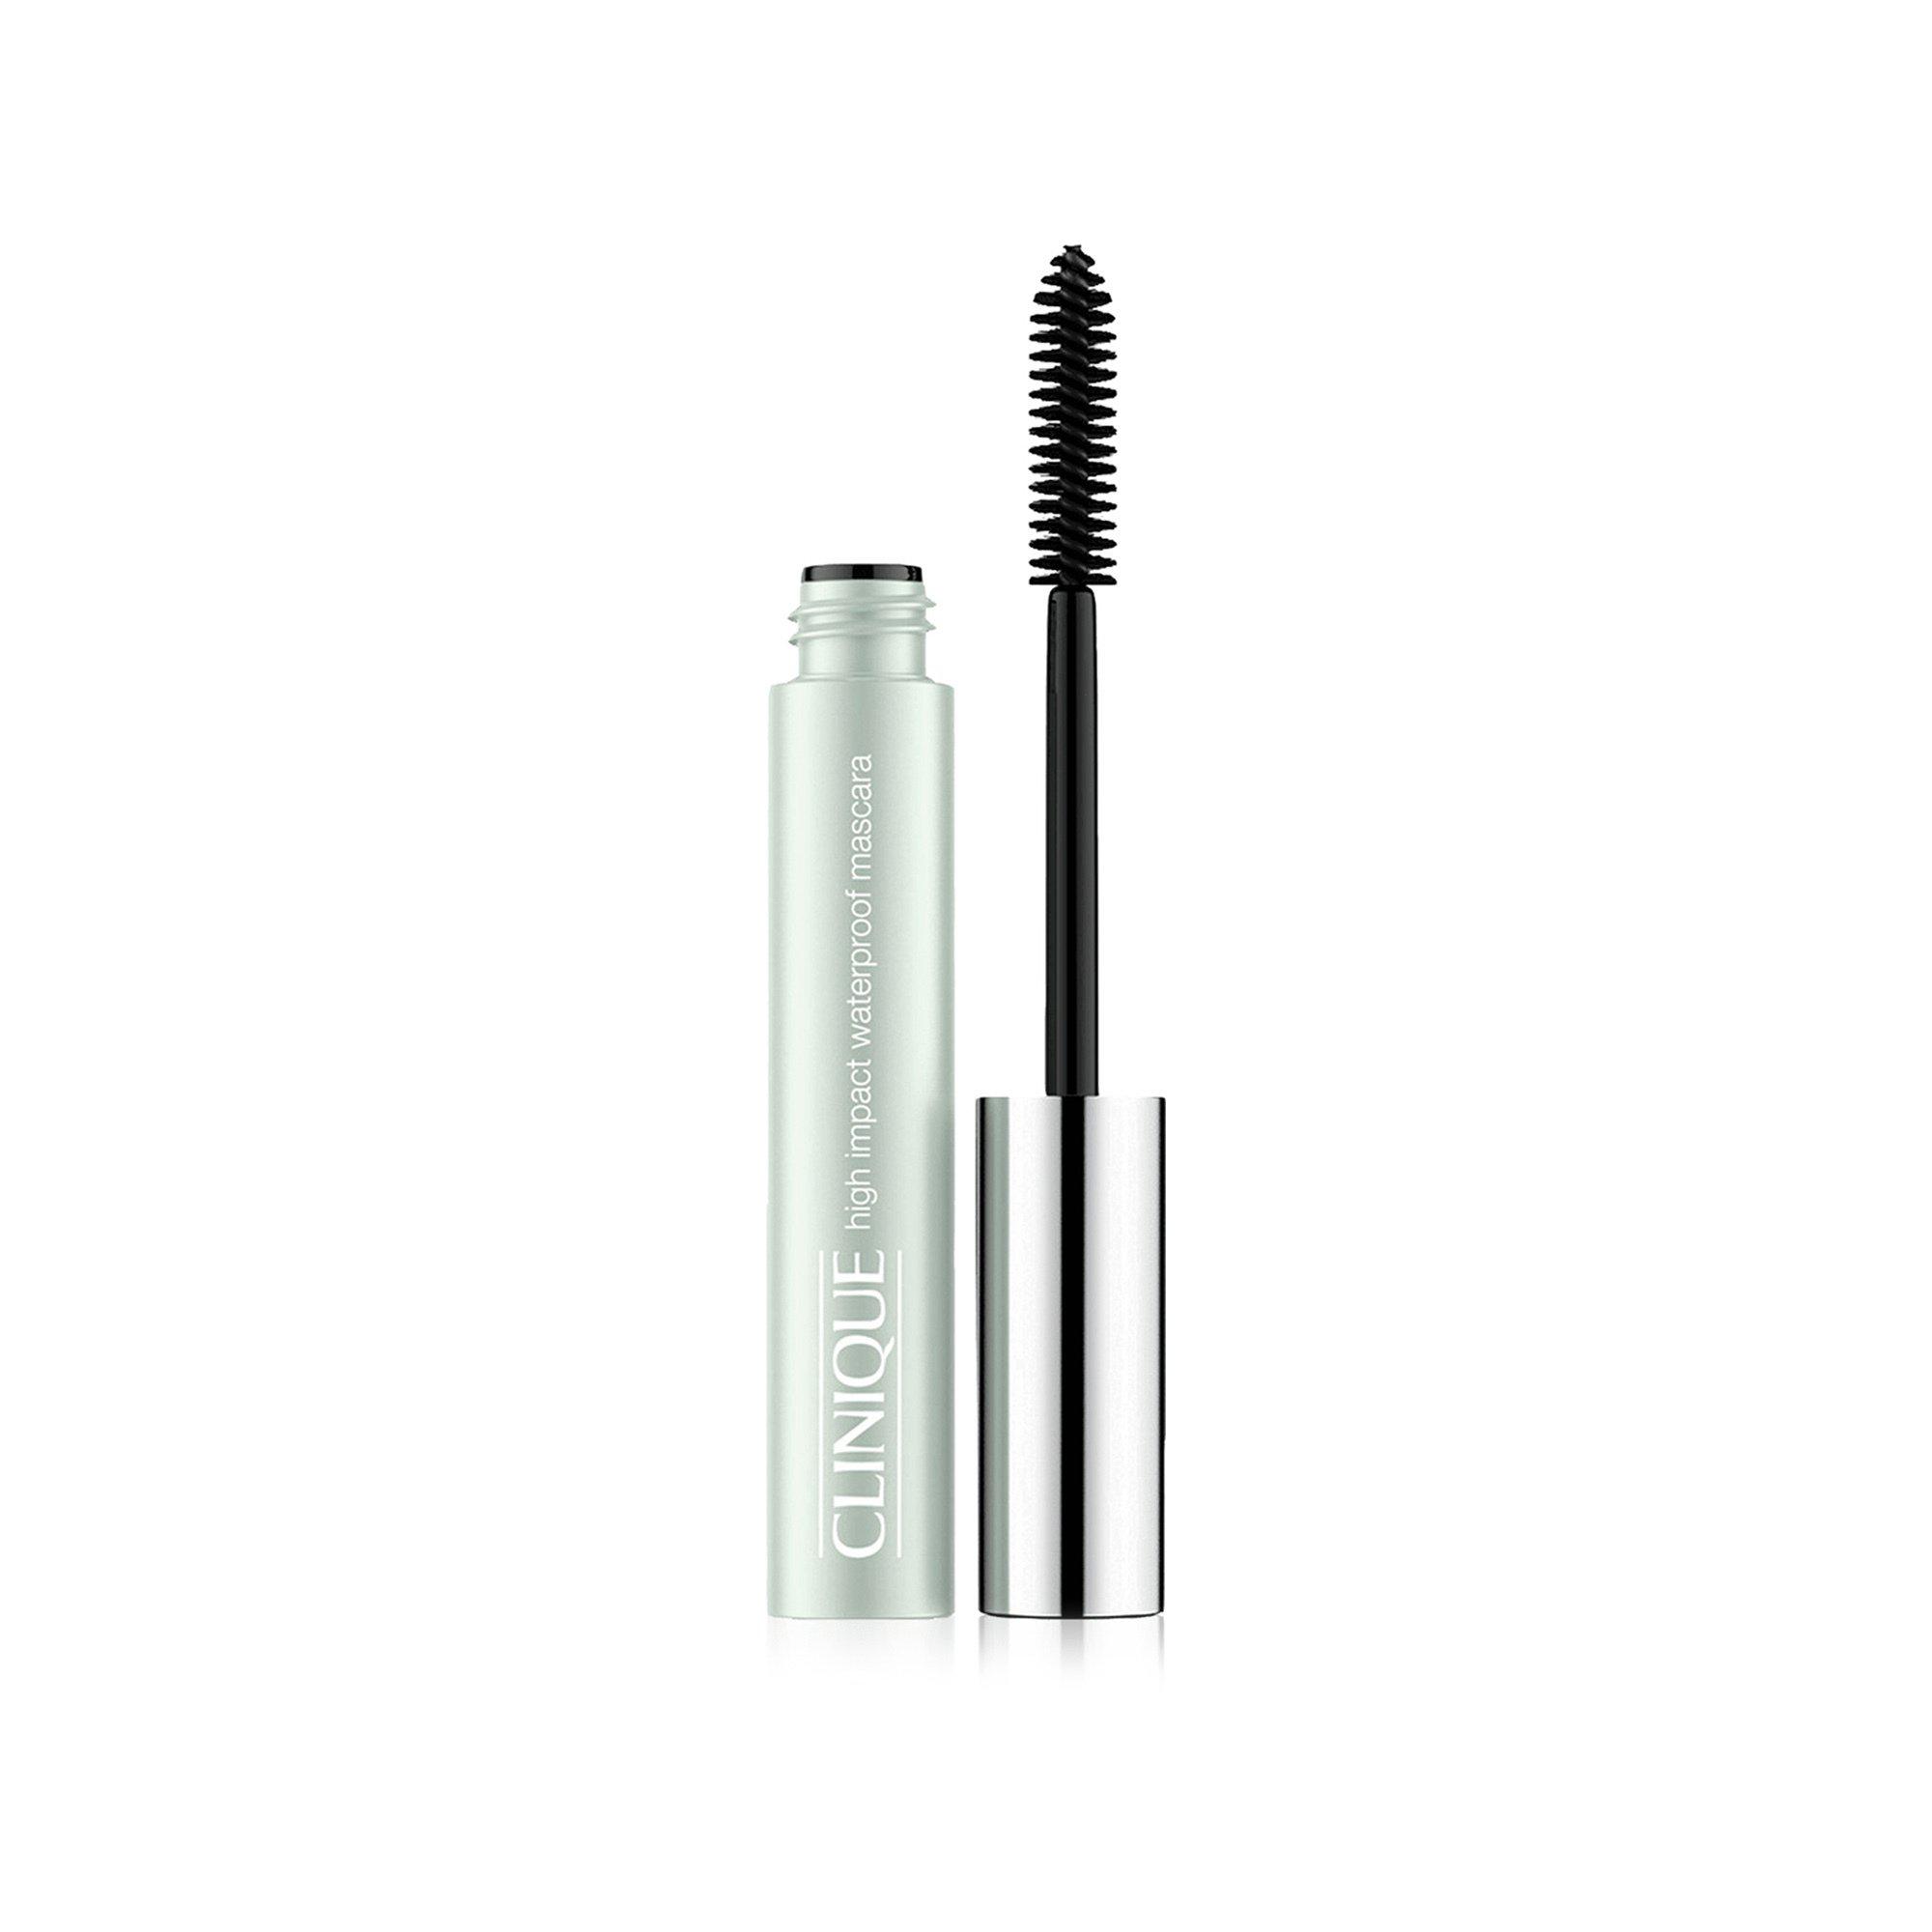 Image of CLINIQUE High Impact Mascara Waterproof - 8ml